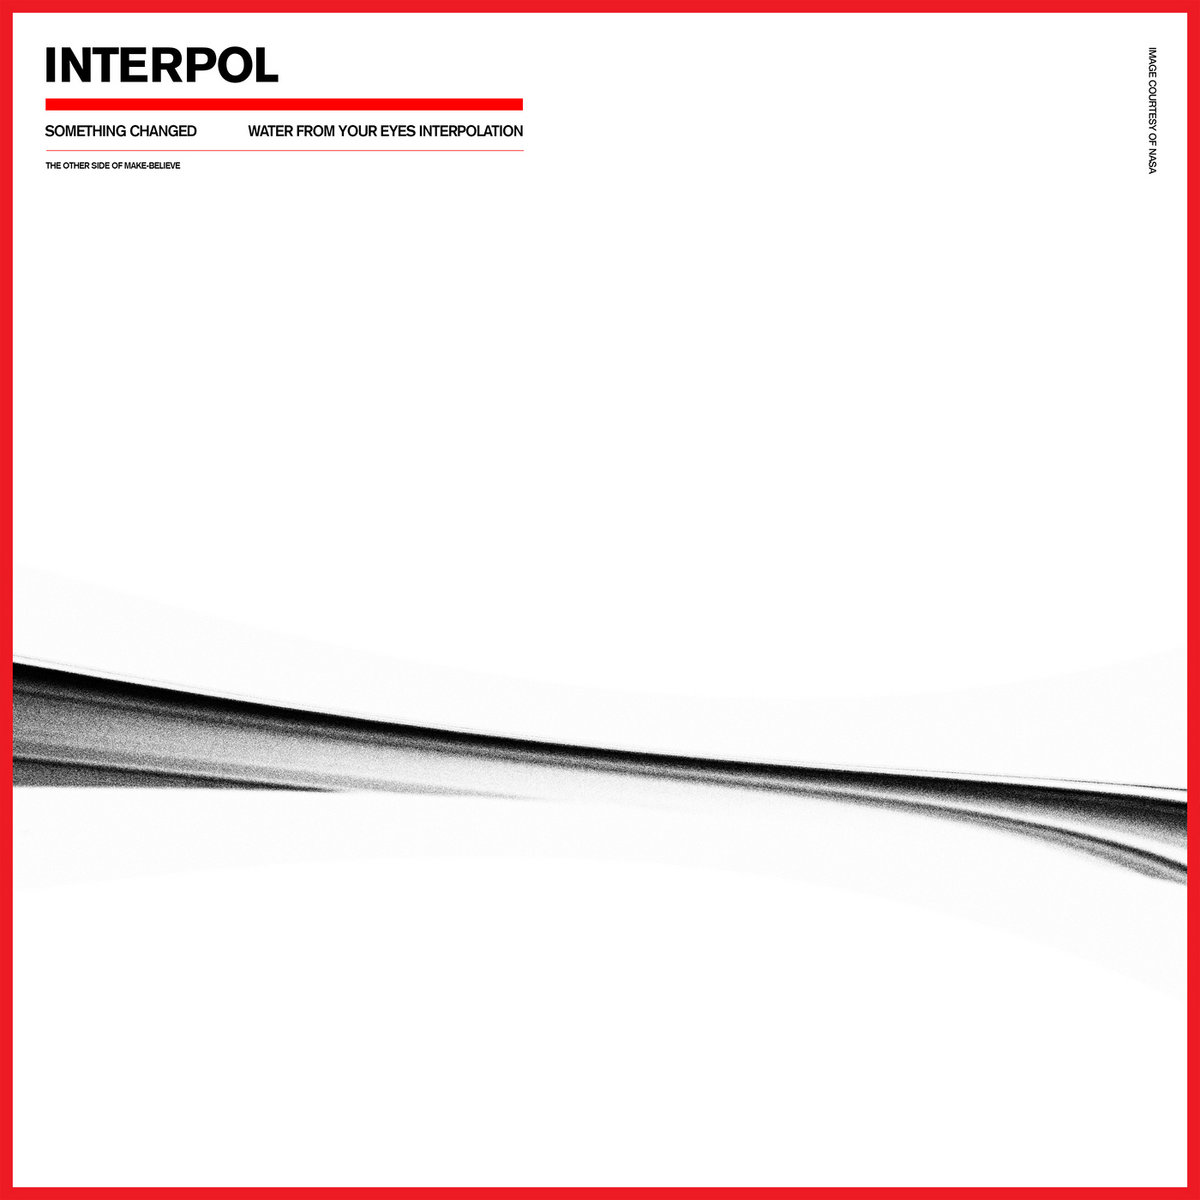 News – Interpol & Water from Your Eyes – Something Changed (Water From Your Eyes Interpolation)